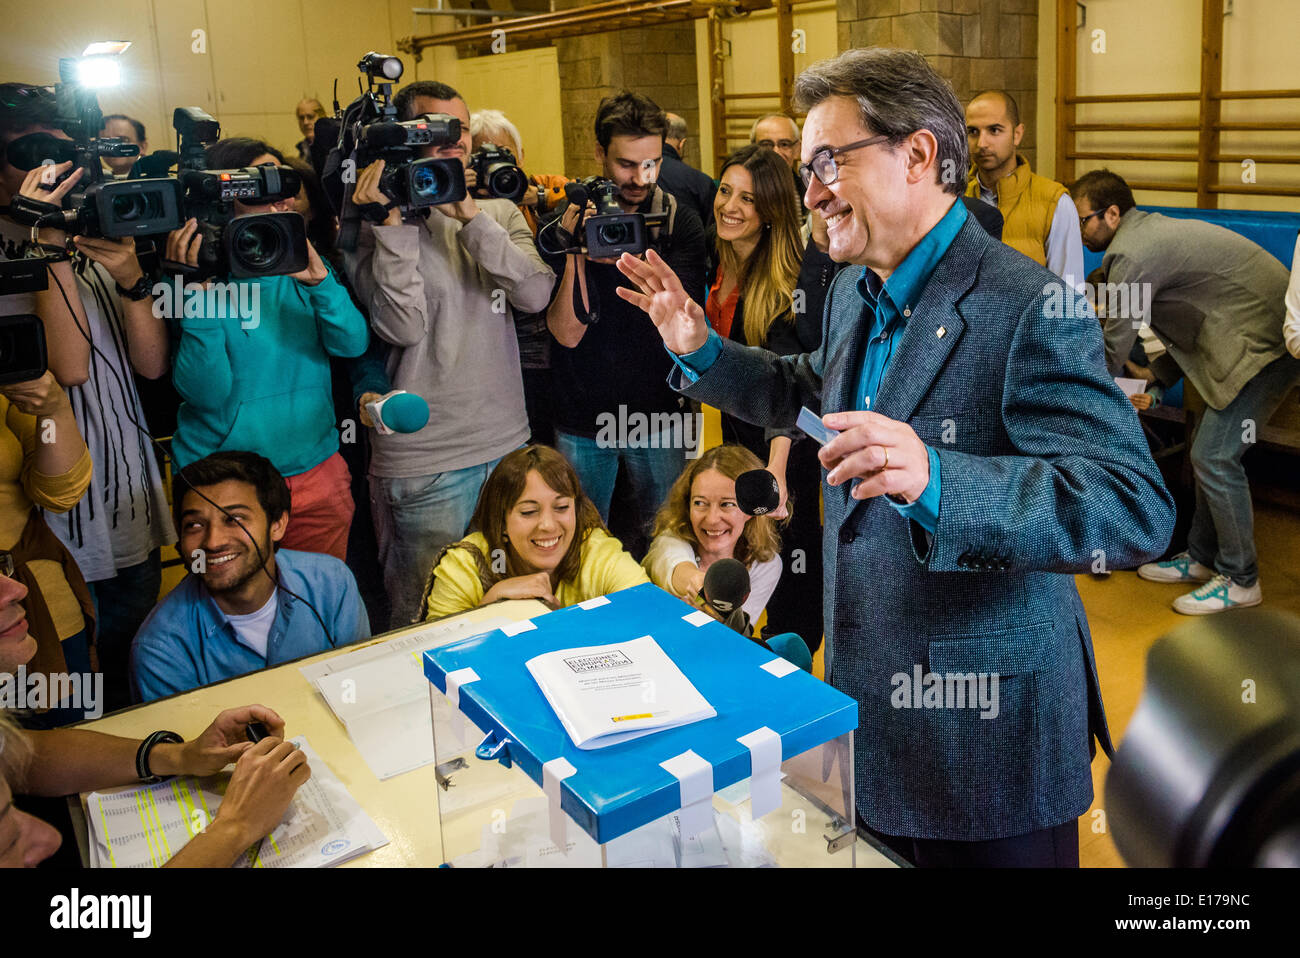 Barcelona, Spain. May 25th, 2014: Artur Mas i Gavarro, President of the Generalitat de Catalunya, casts his ballot in the European Parliament election in a polling station in Barcelona. Credit:  matthi/Alamy Live News Stock Photo